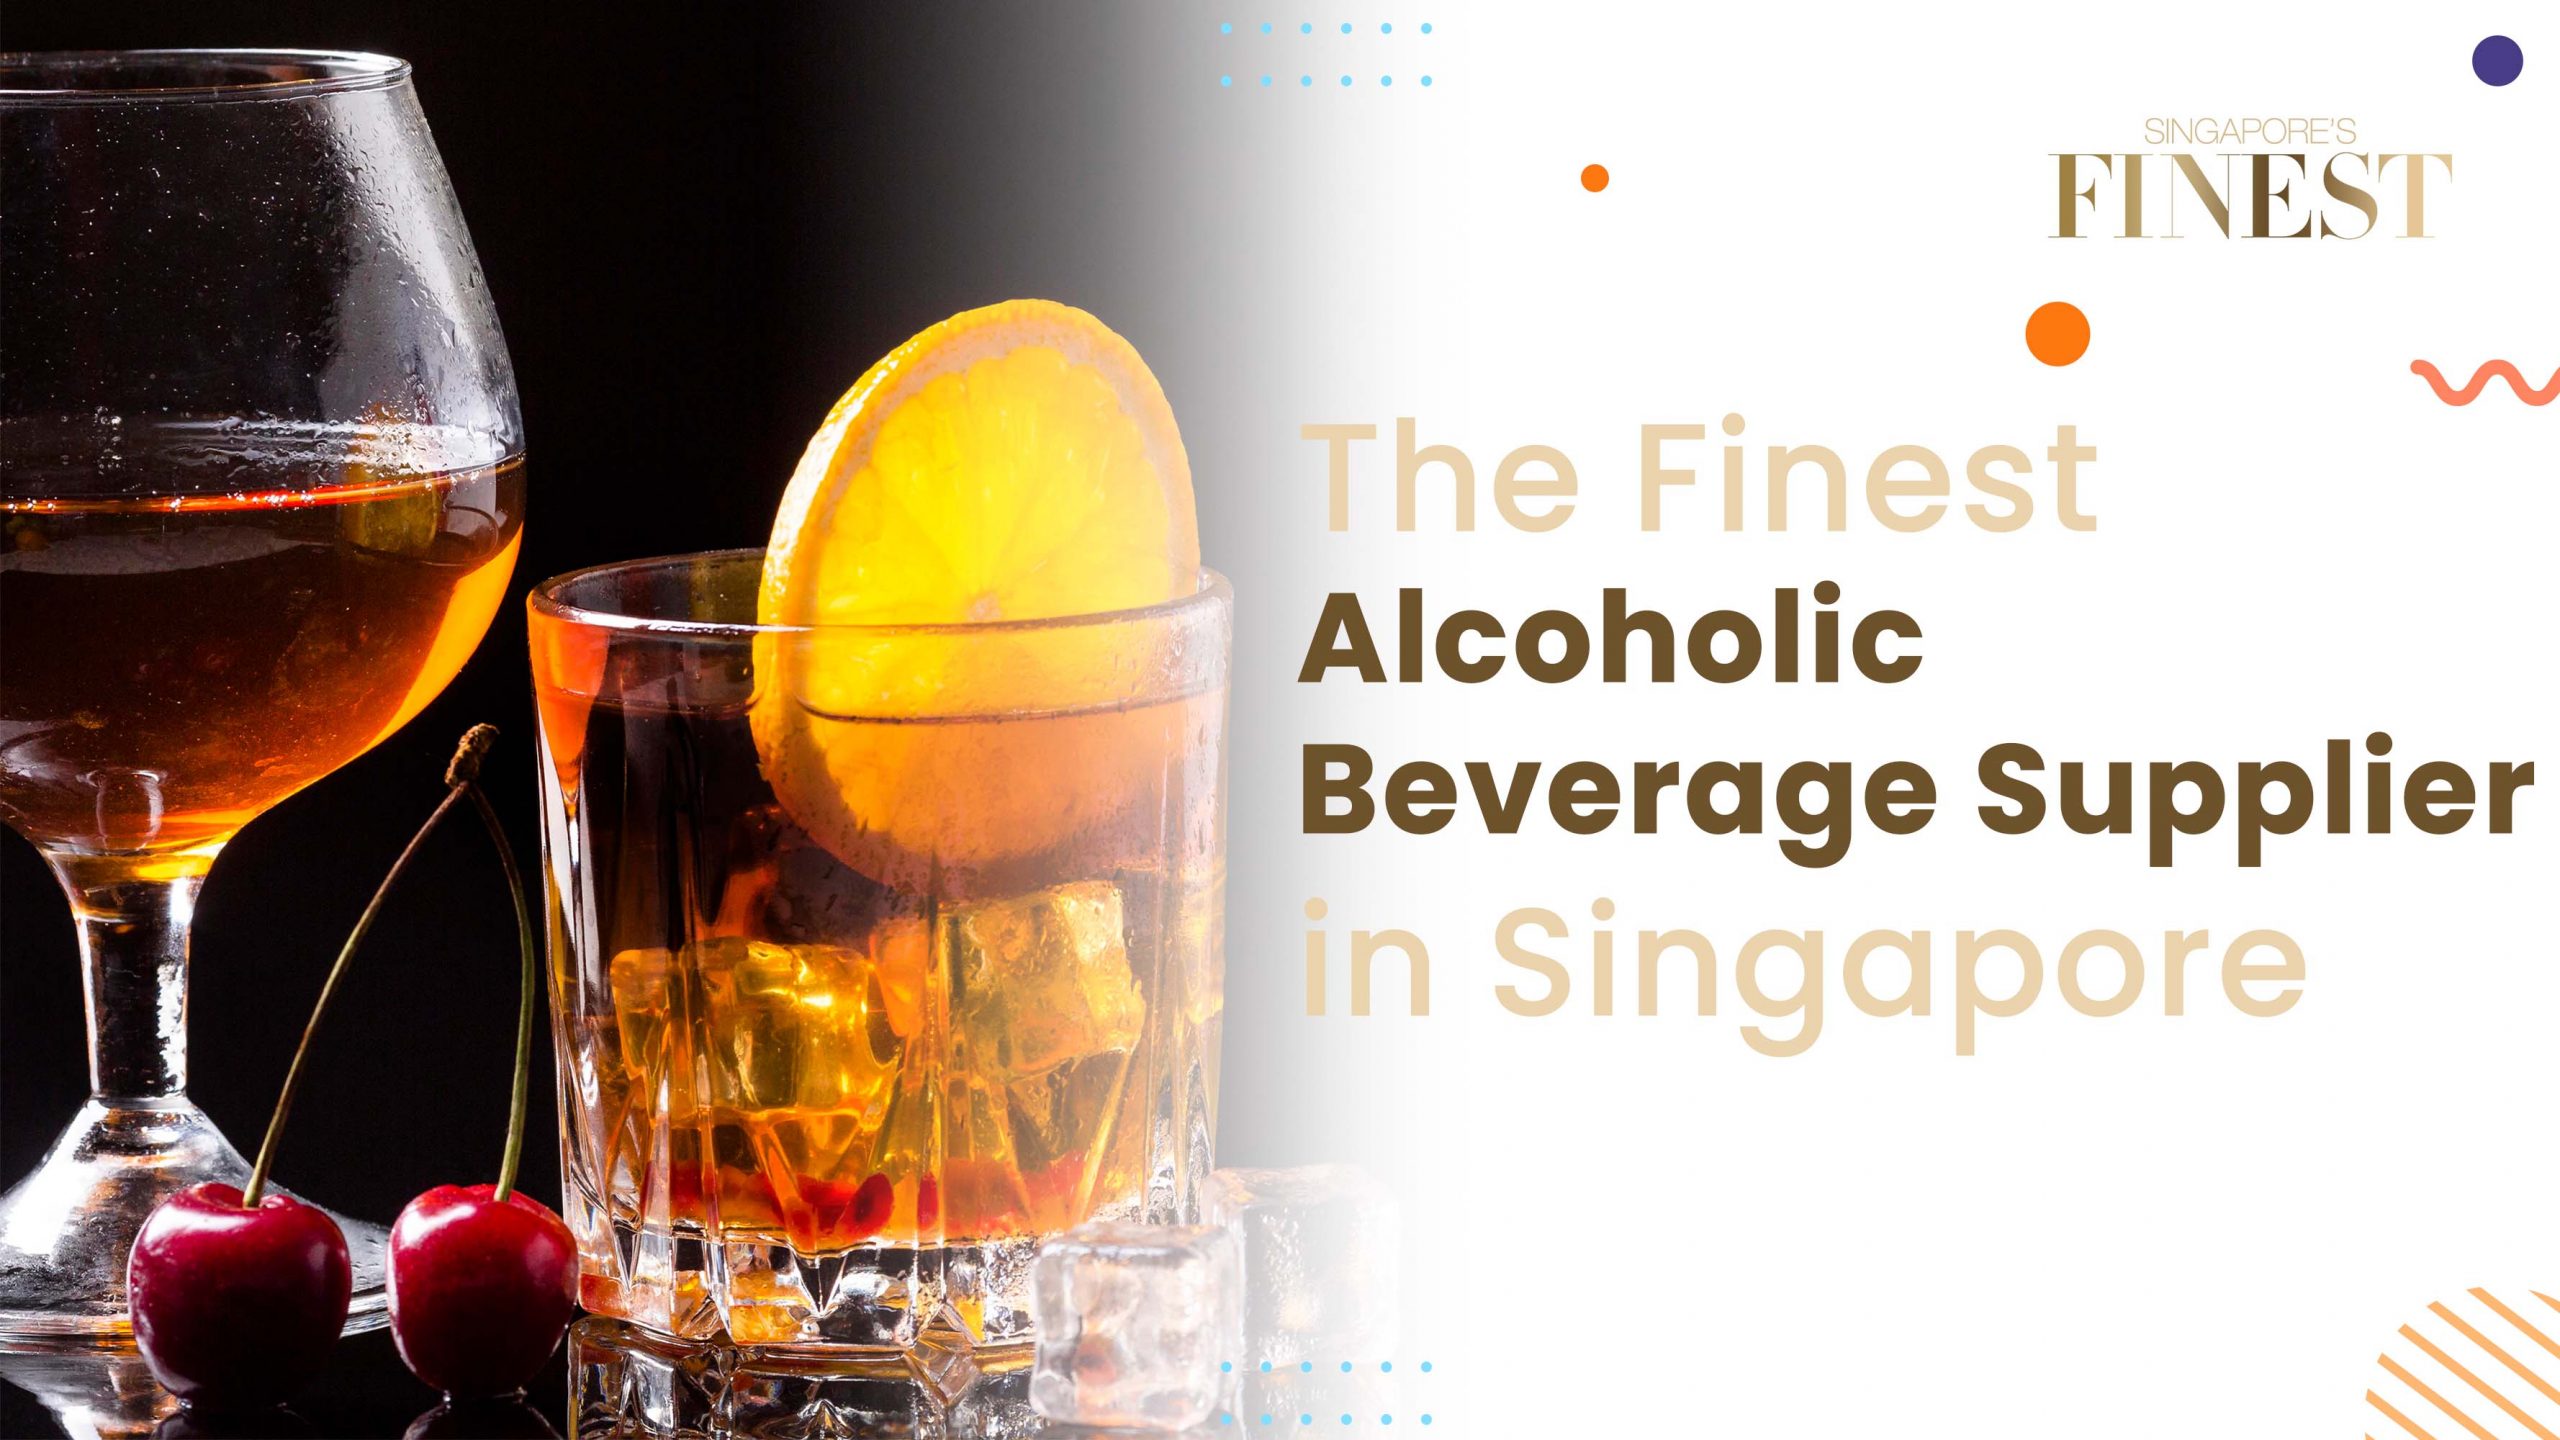 Finest Alcoholic Beverage Supplier in Singapore